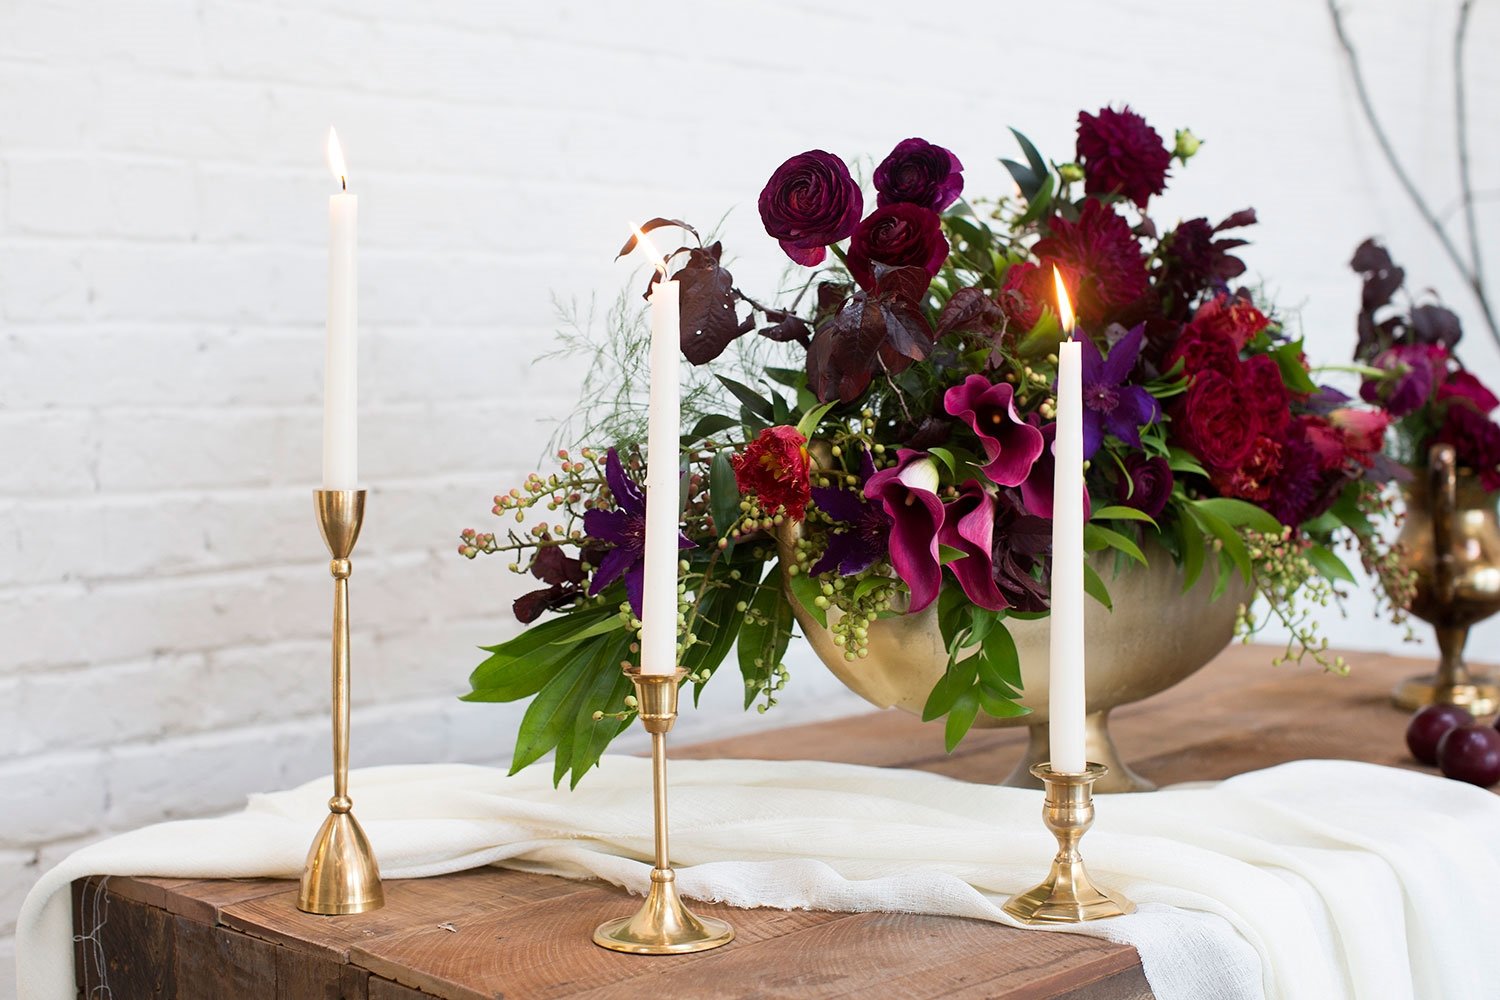 Brass candlesticks on a table with a purple and pink bouquet